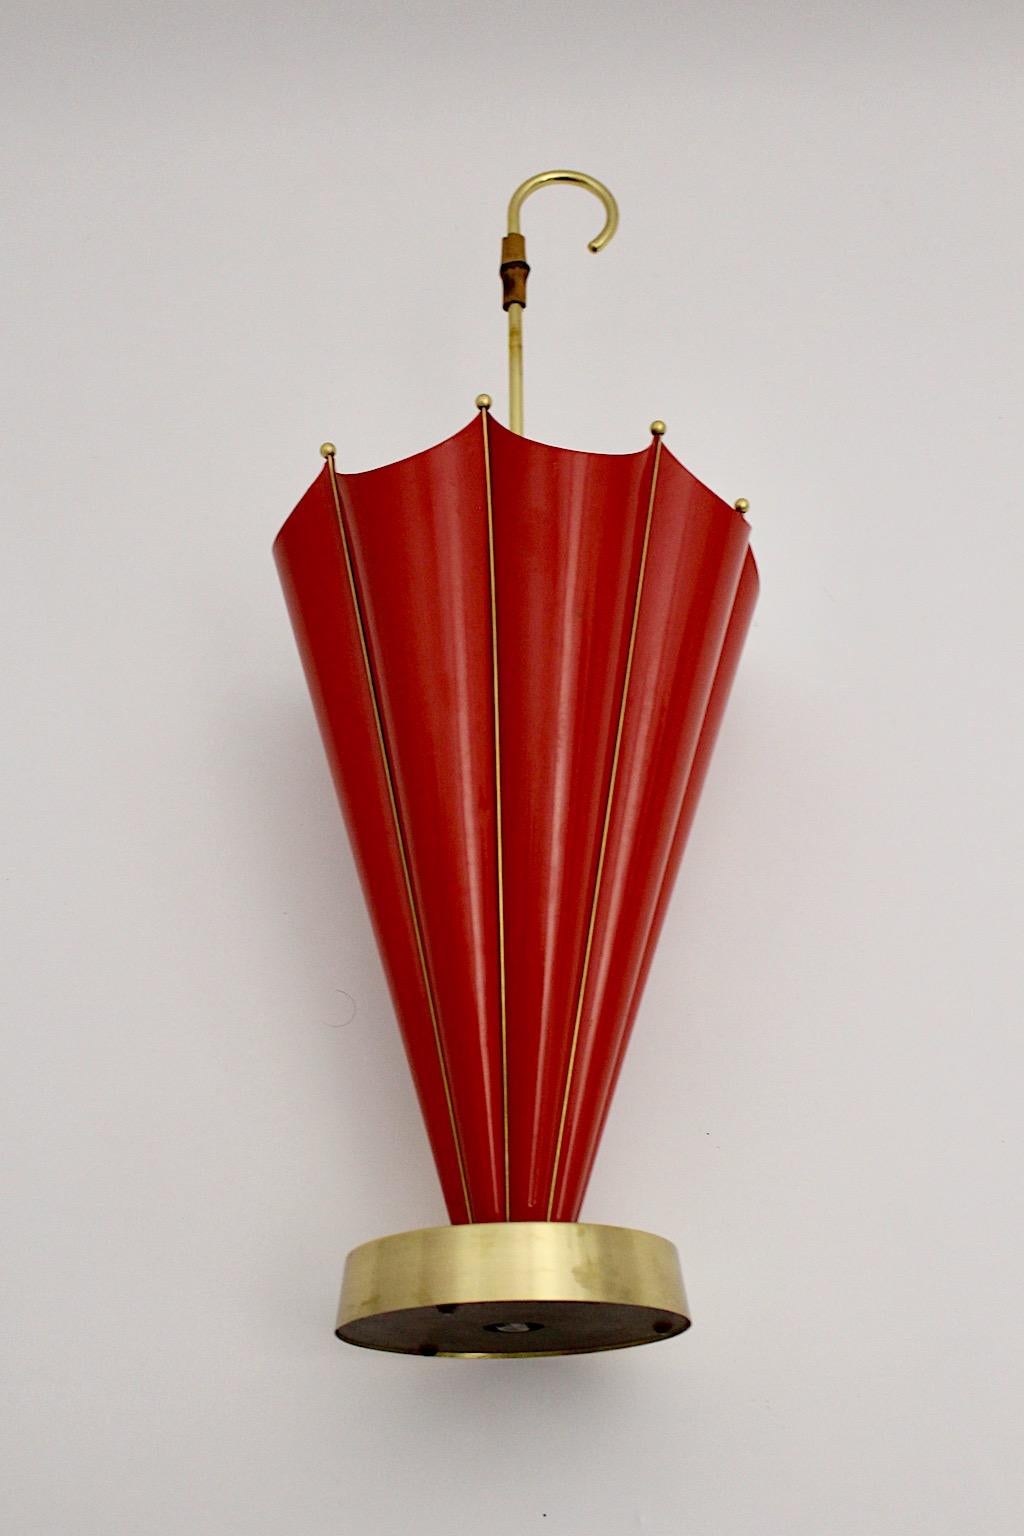 Mid-Century Modern vintage umbrella stand or cane holder from red lacquered metal, brass and bamboo 1950s Italy.
While the cast iron base supports the umbrella stand for a safe standing, the body from red lacquered metal with brass details umbrella